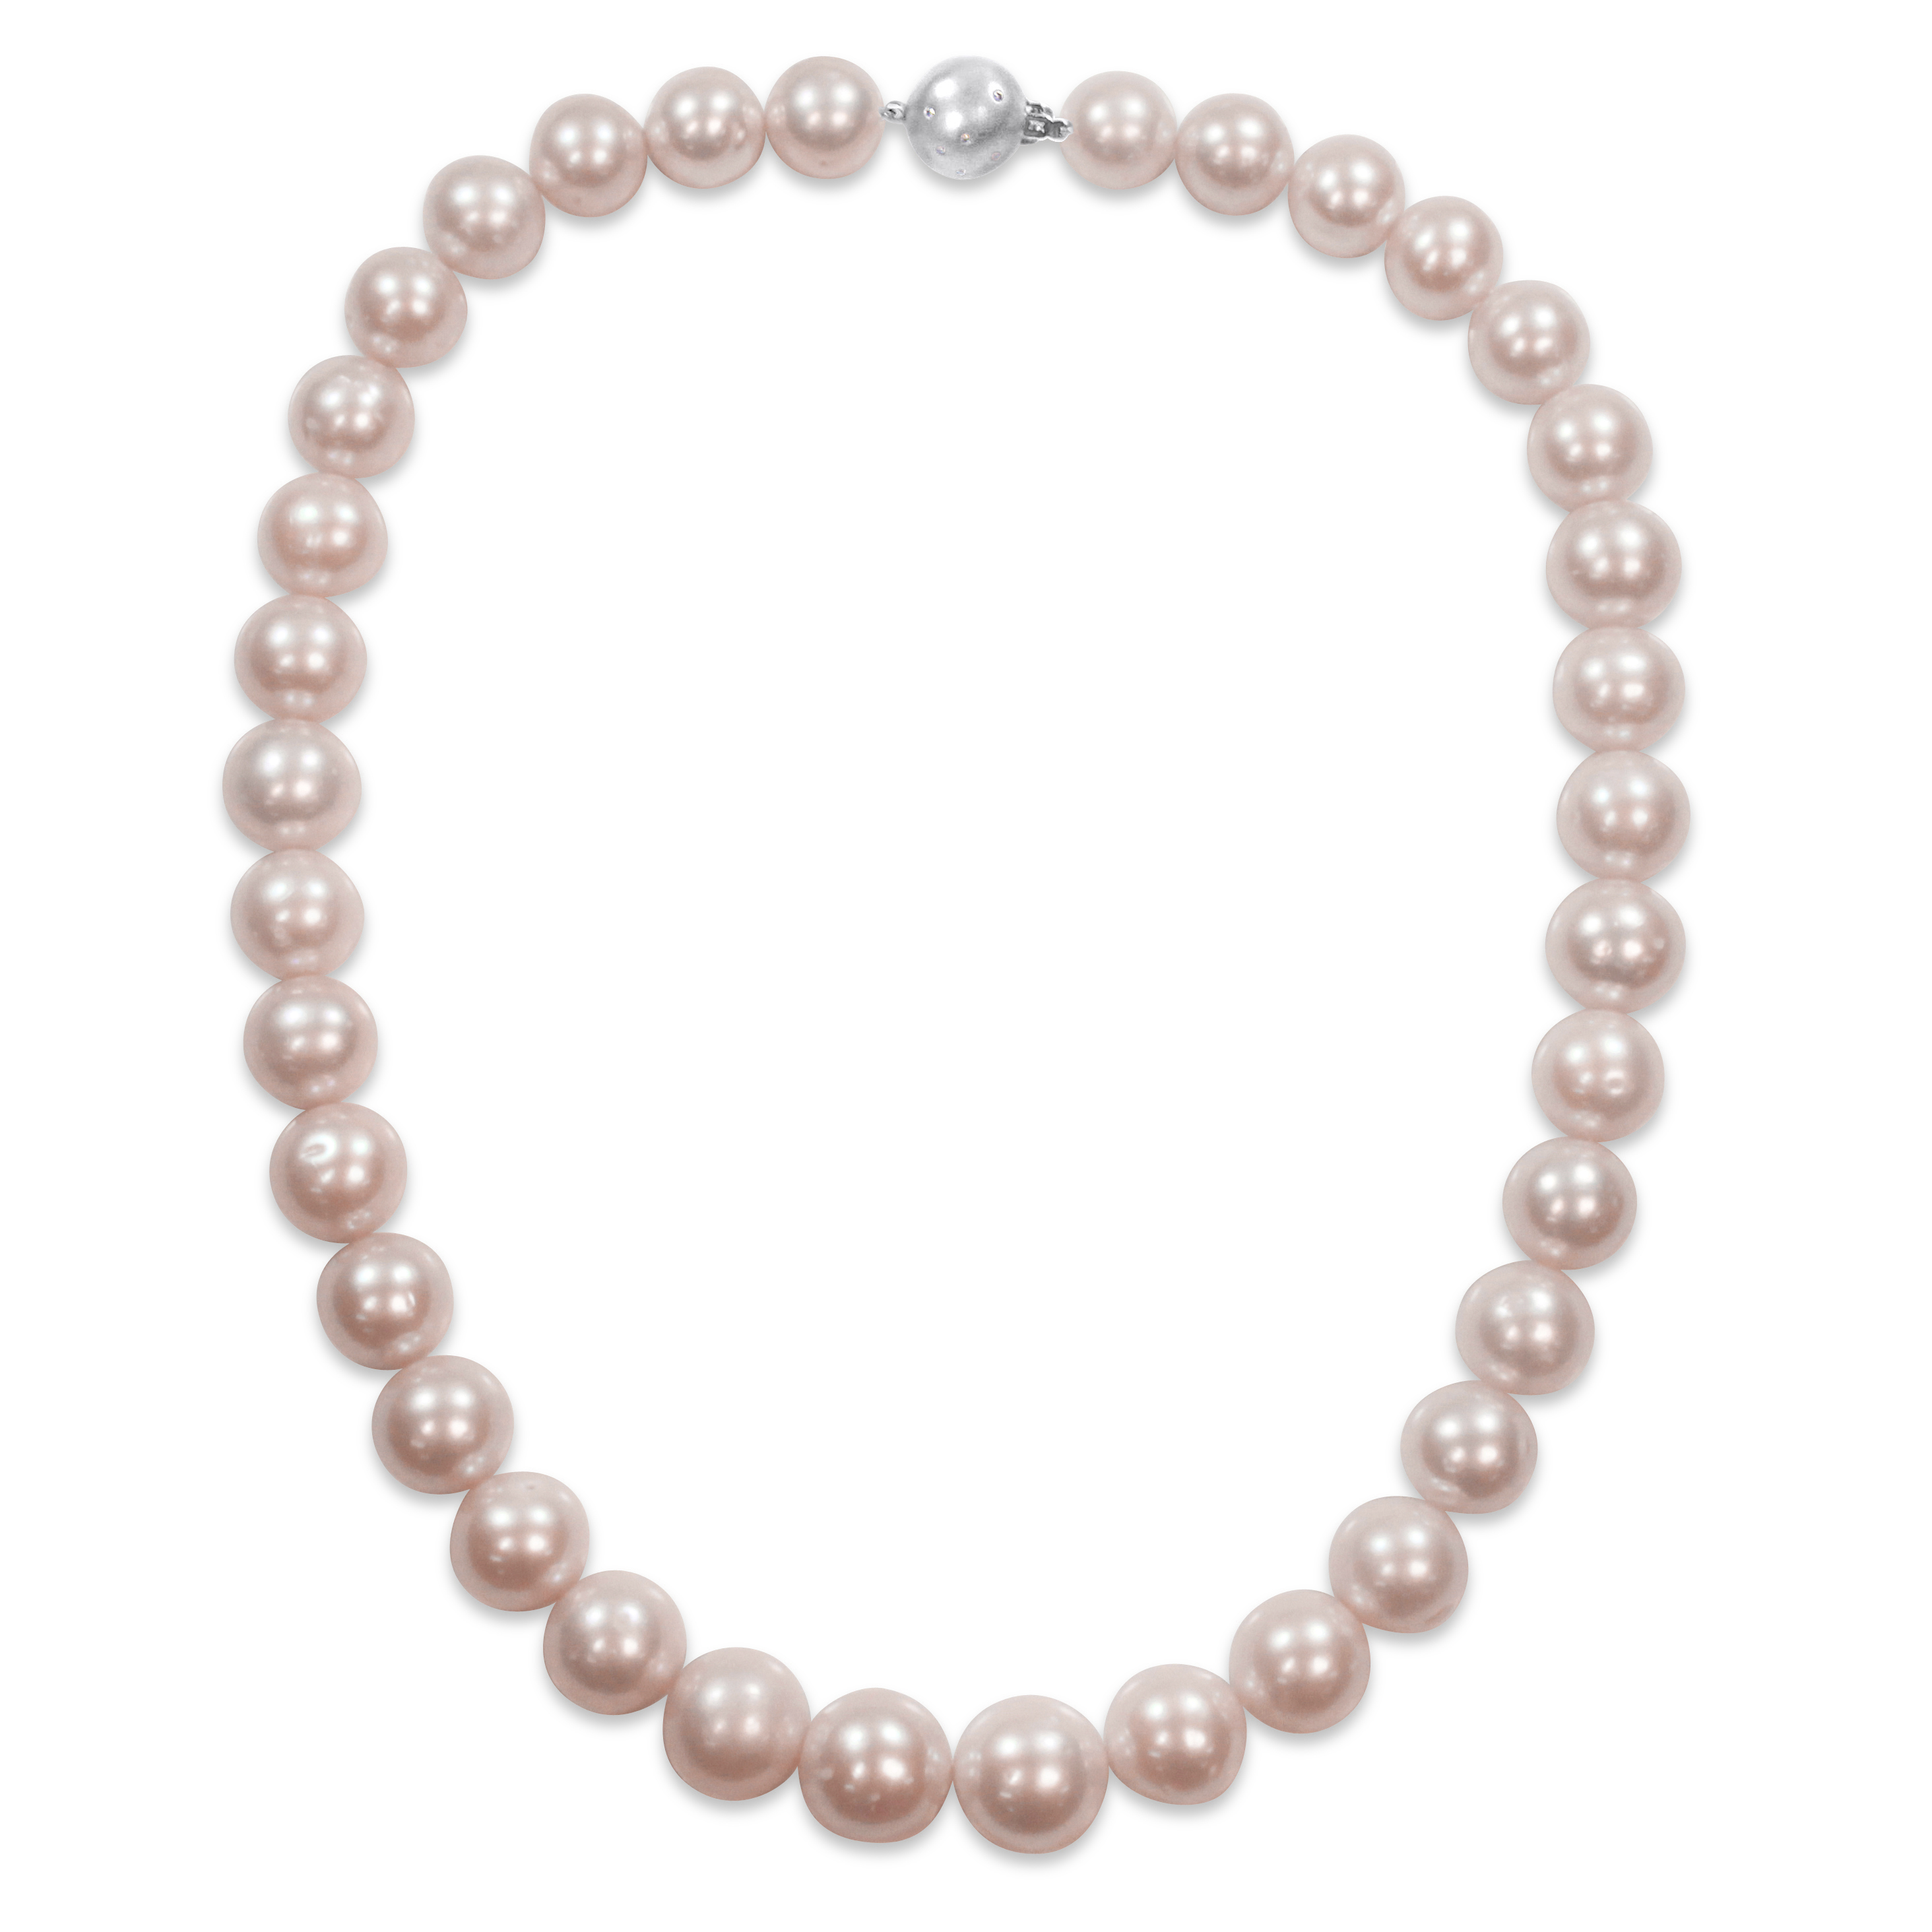 11-11.5MM Pink Freshwater Cultured Pearl Necklace with 14k White Gold Diamond Accent Ball Clasp - 18 in